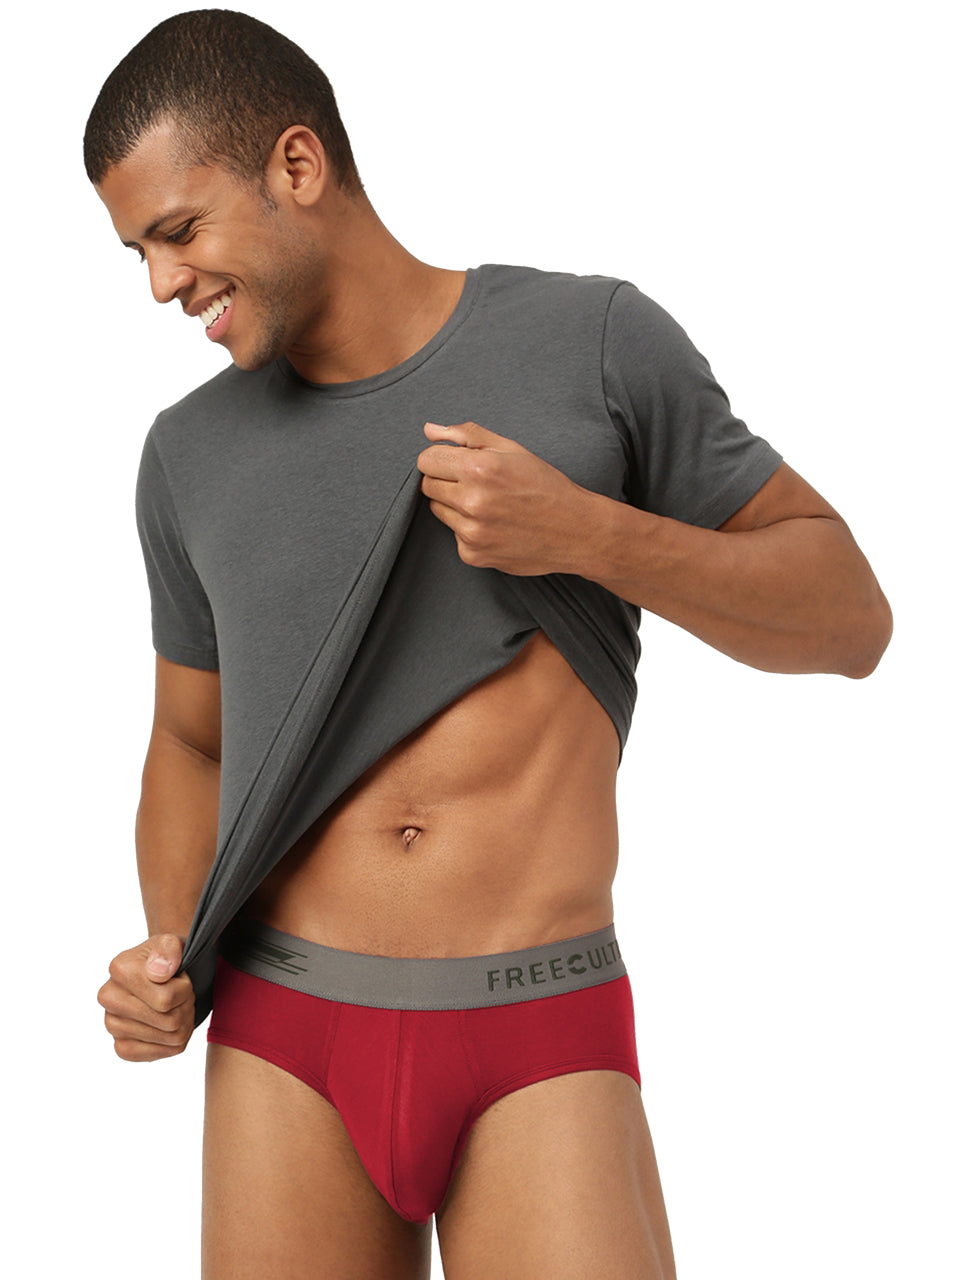 Men's Brief And Women's Boxer Brief Combo (Pack of 2)